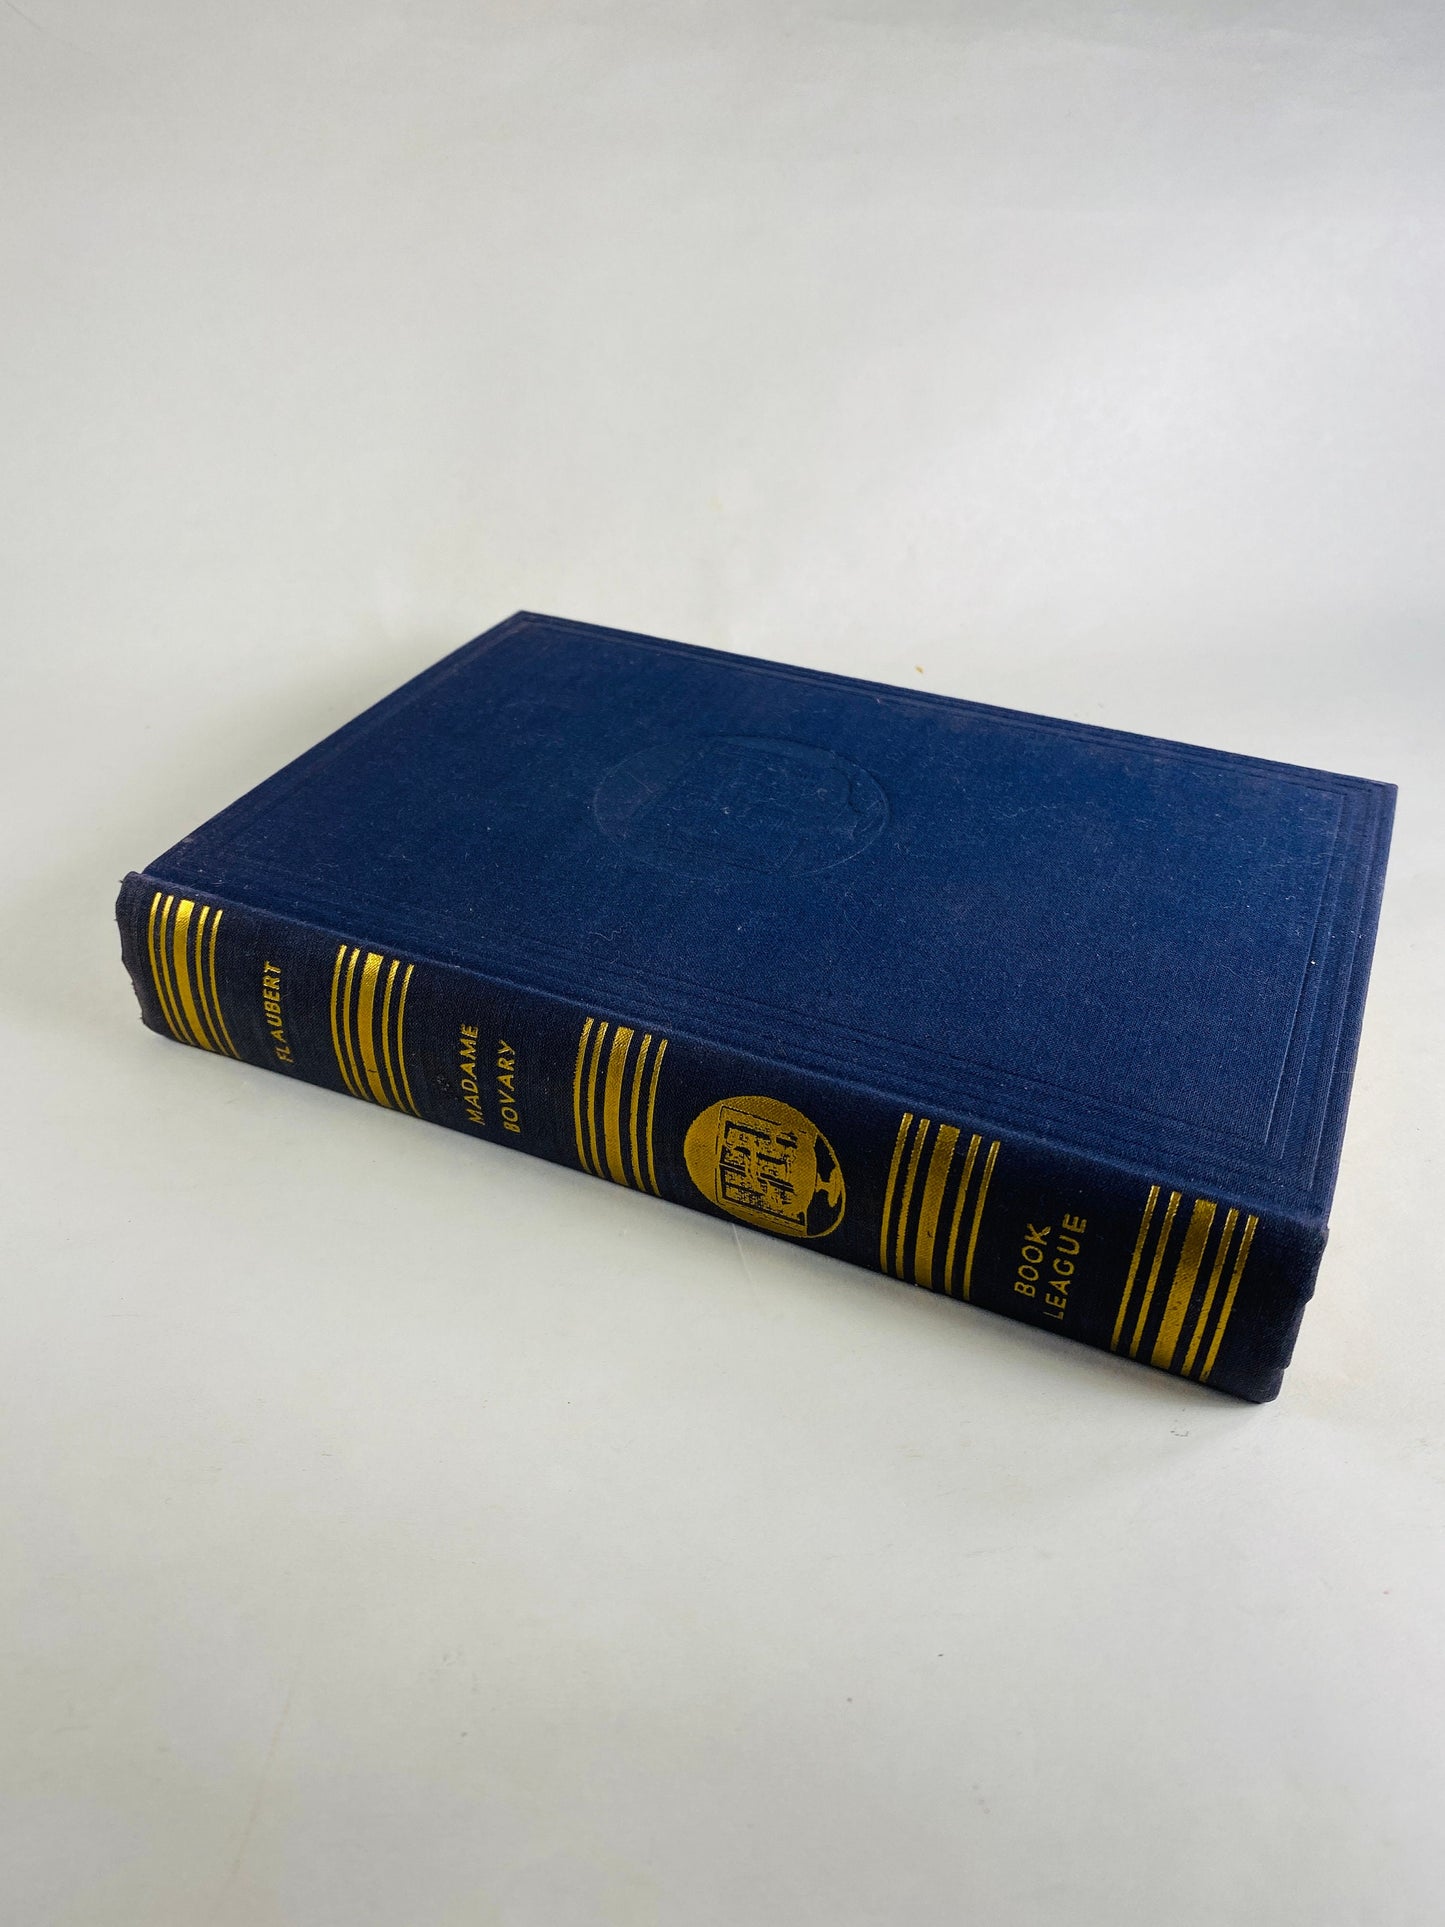 Madame Bovary by Gustave Falubert Beautiful blue vintage book circa 1936 embossed in gold Romantic wedding or engagement gift